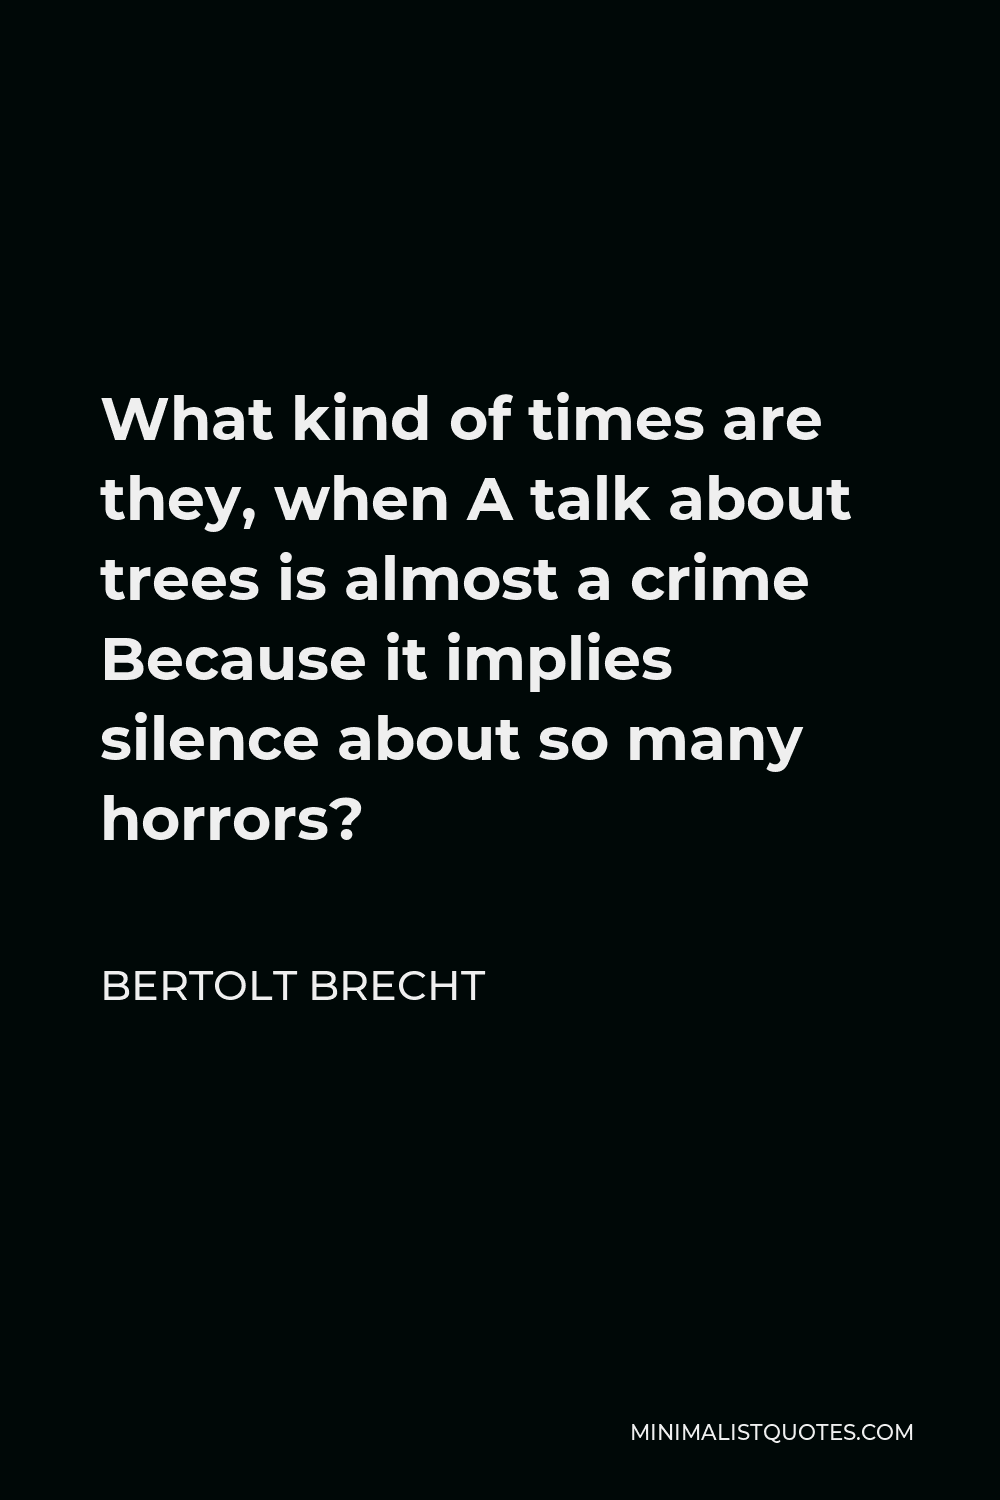 Bertolt Brecht Quote - What kind of times are they, when A talk about trees is almost a crime Because it implies silence about so many horrors?